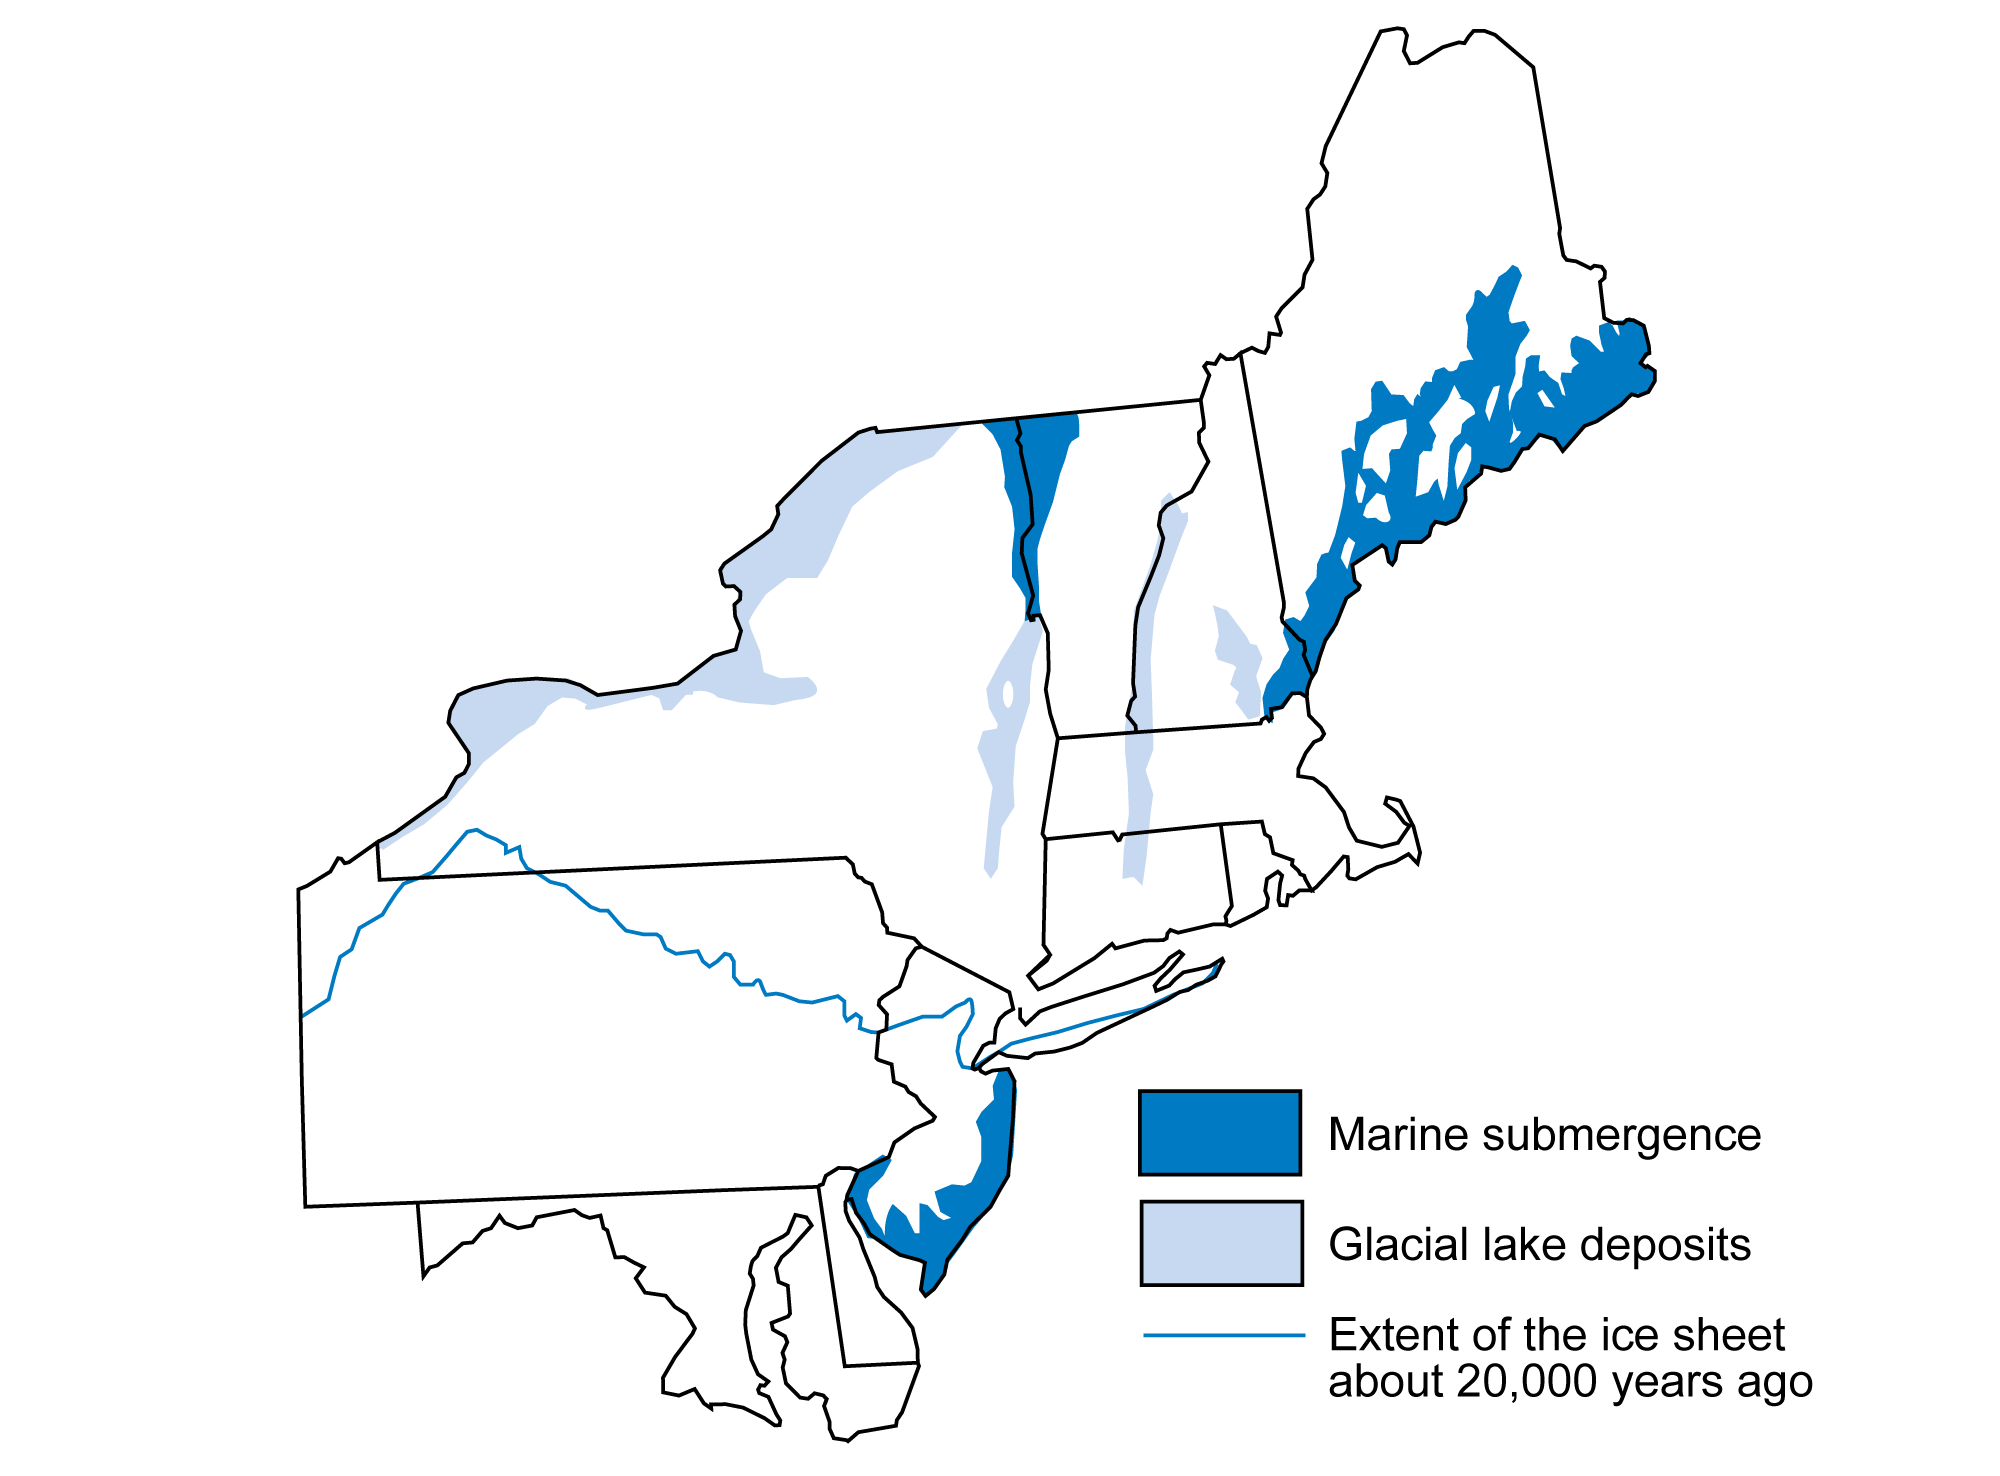 Map of the northeastern United States 12,000 years ago with state boundaries outlined in black. Glacial lake deposits are shaded light blue and occur across northern New York, in east-central New York, along the Vermont-New Hampshire border south into northern Connecticut, and in southeastern New Hampshire. Areas of marine submergence are shaded dark blue. These include the northeastern New York-northwestern Vermont border, the southern coast of New Jersey, and the southern part of Maine to southeastern New Hampshire. A blue line shows the maximum extent of the ice sheet at the last glacial maximum 20,000 yers ago. It extends from northwestern Pennsylvania, north into southwestern New York, and southeast across Pennsylvania and across northern New Jersey and southern Long Island. 